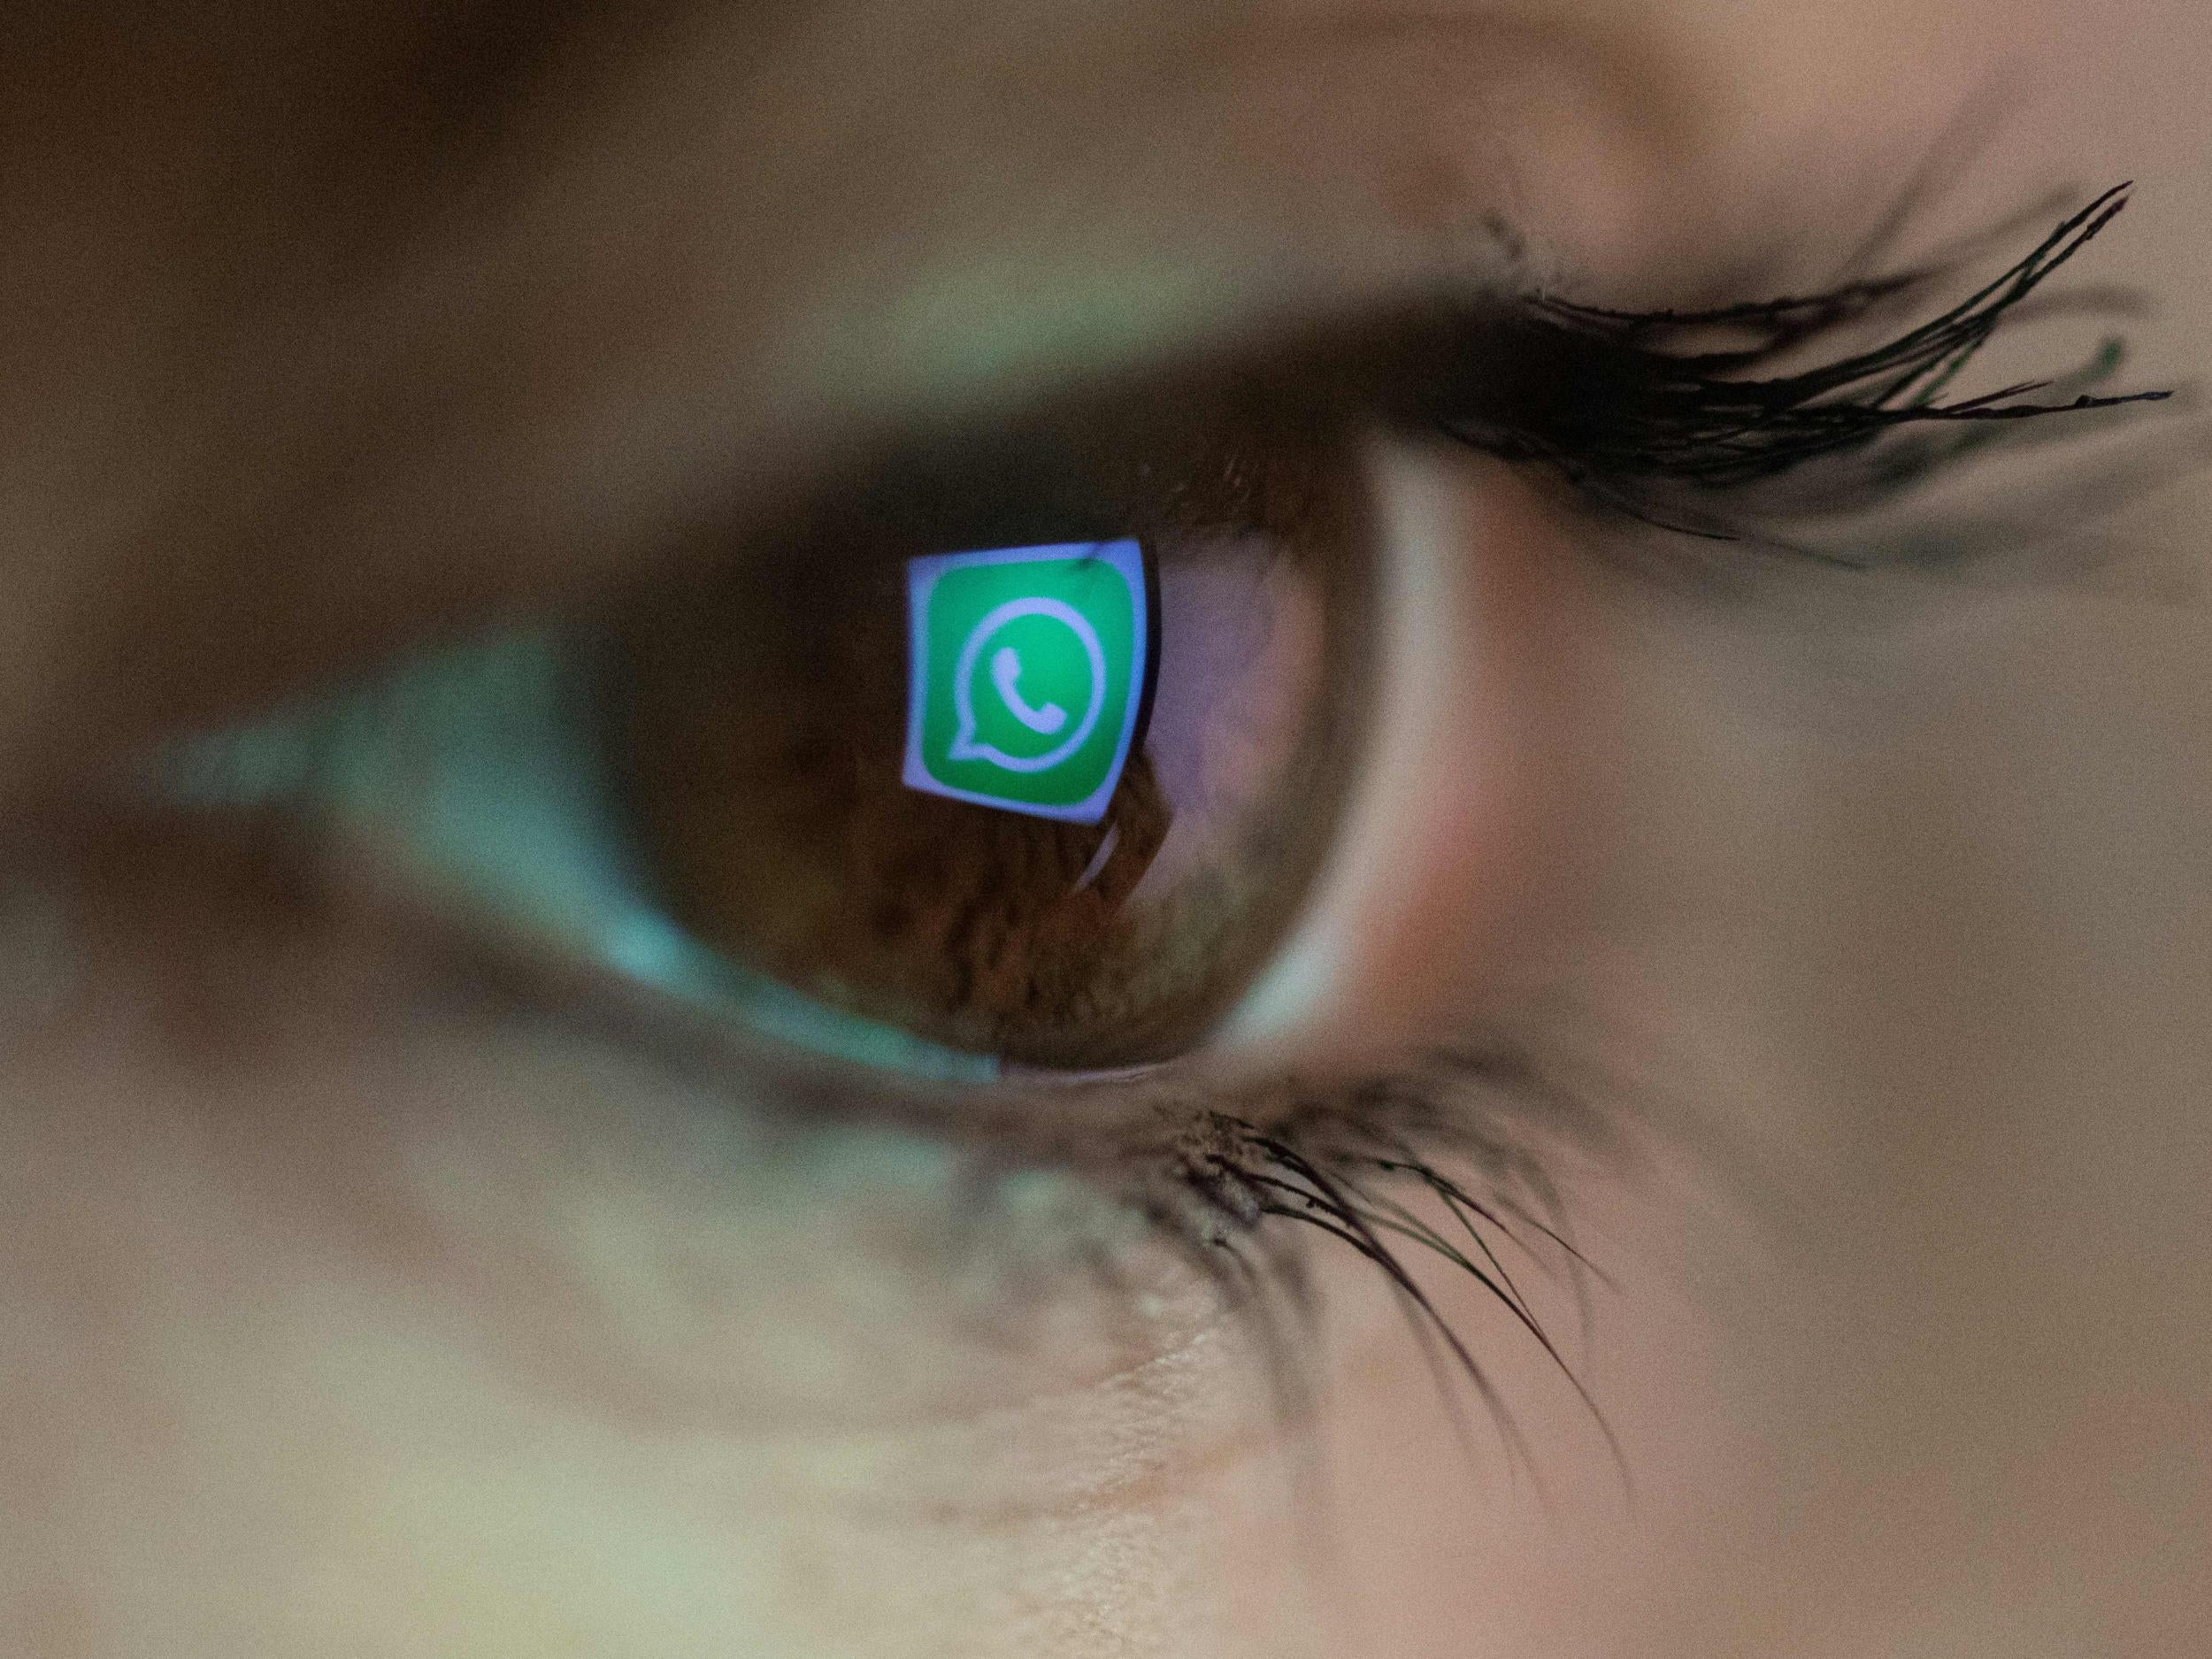 Xxx Reaf Video - WhatsApp is hotbed for child sex abuse videos in India, study ...